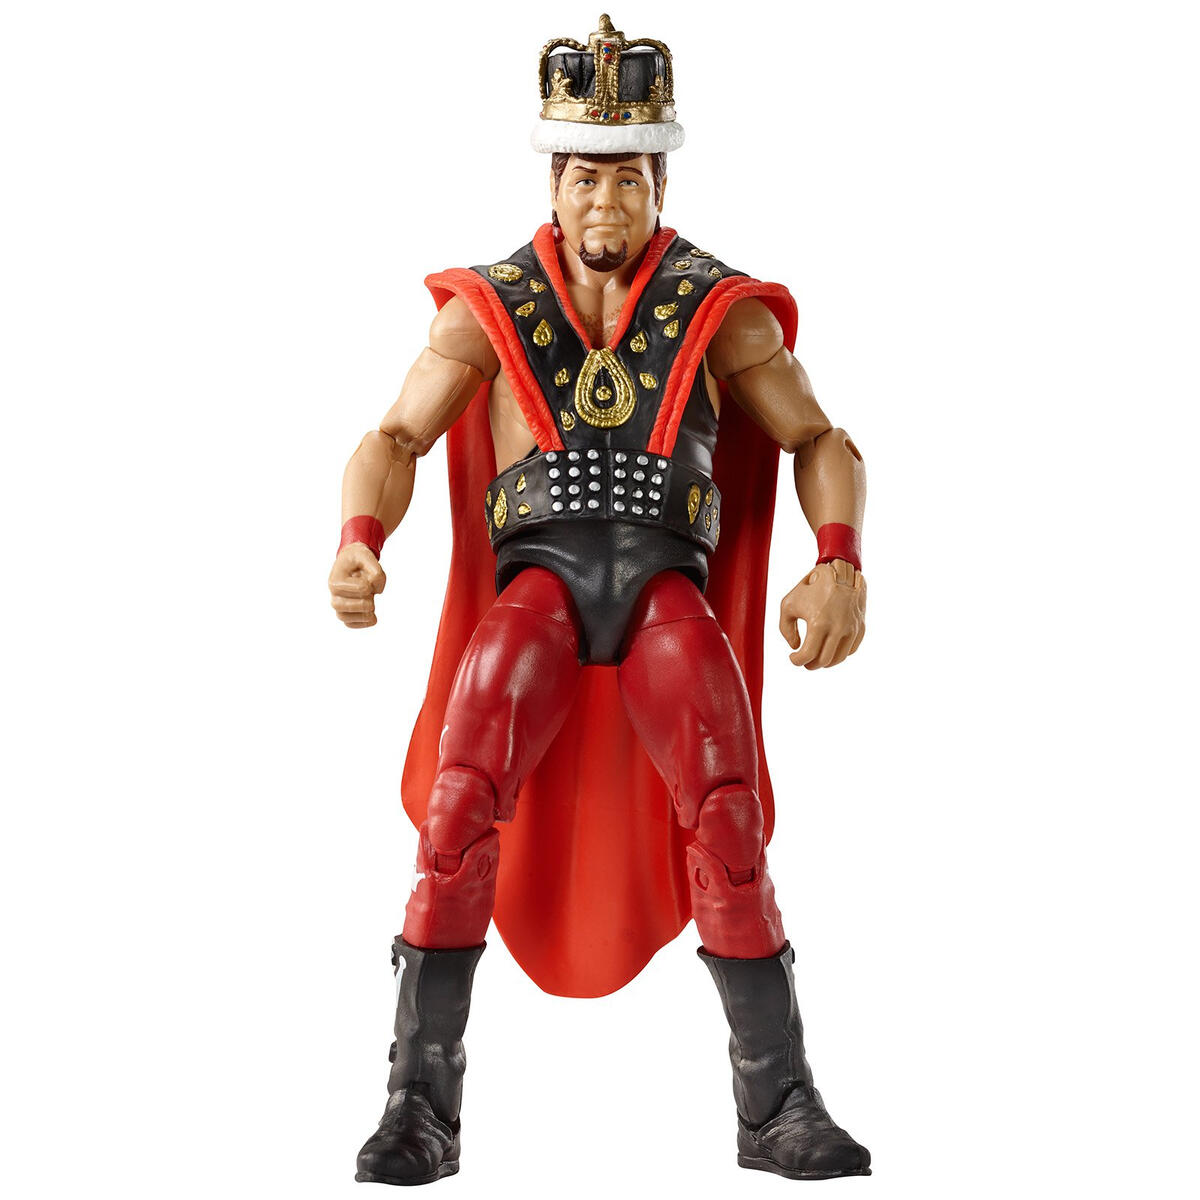 Jerry "The King" Lawler, complete with detailed crown and entrance attire (WWE Hall of Fame Class of 2007)